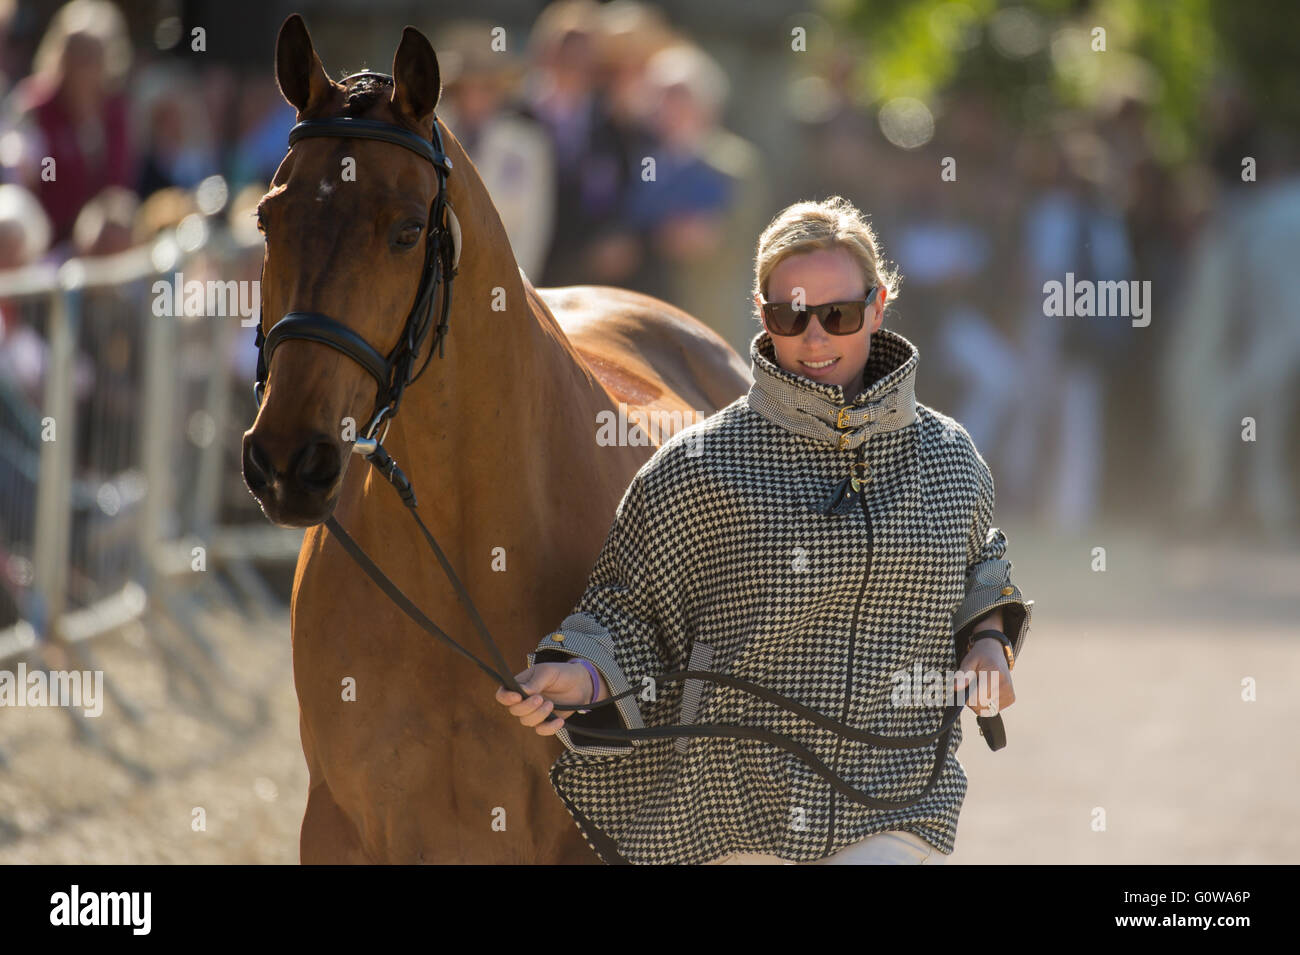 Badminton, South Gloucestershire, 4th May 2016, Zara Tindall and her horse High Kingdom take part in the first horse inspection at the Mitsubishi Motors Badminton Horse Trials 2016. The horse inspection takes place before the start of the competition to ensure that the horses are fit to take part in the competition. Credit: Trevor Holt / Alamy Live News Stock Photo